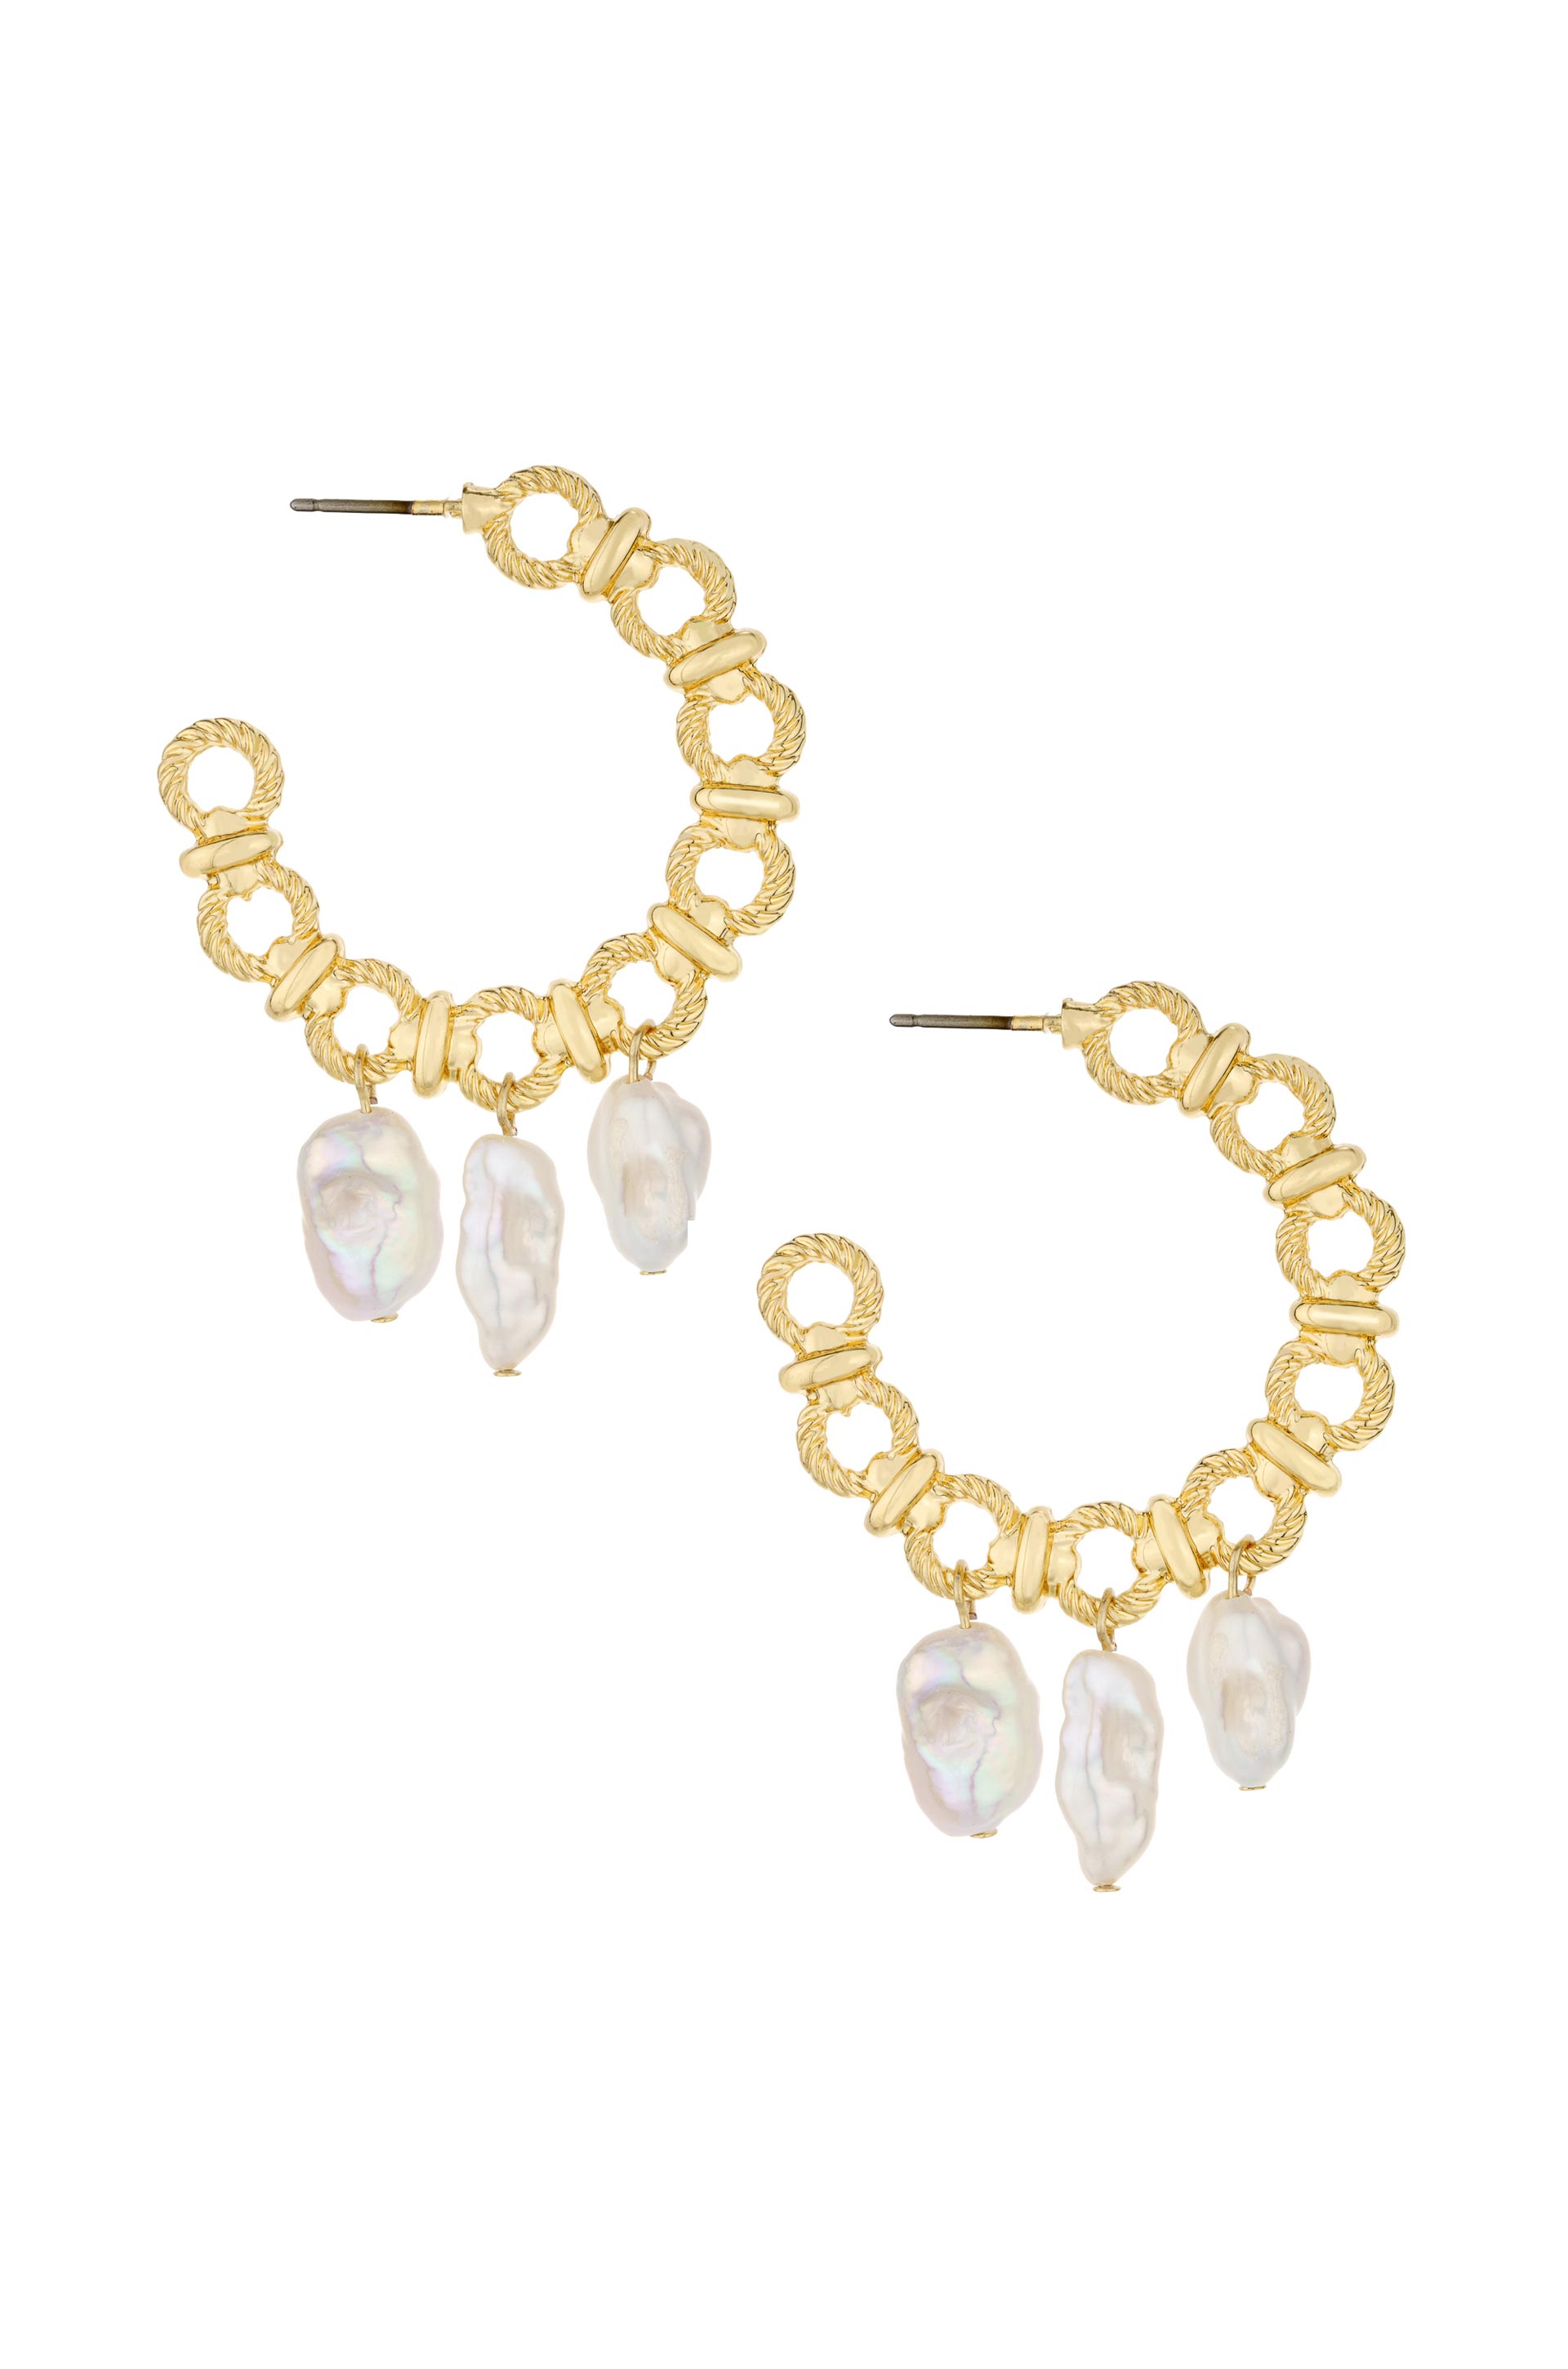 Chunky 18k Gold Plated Hoops with Freshwater Pearl Charms on white background